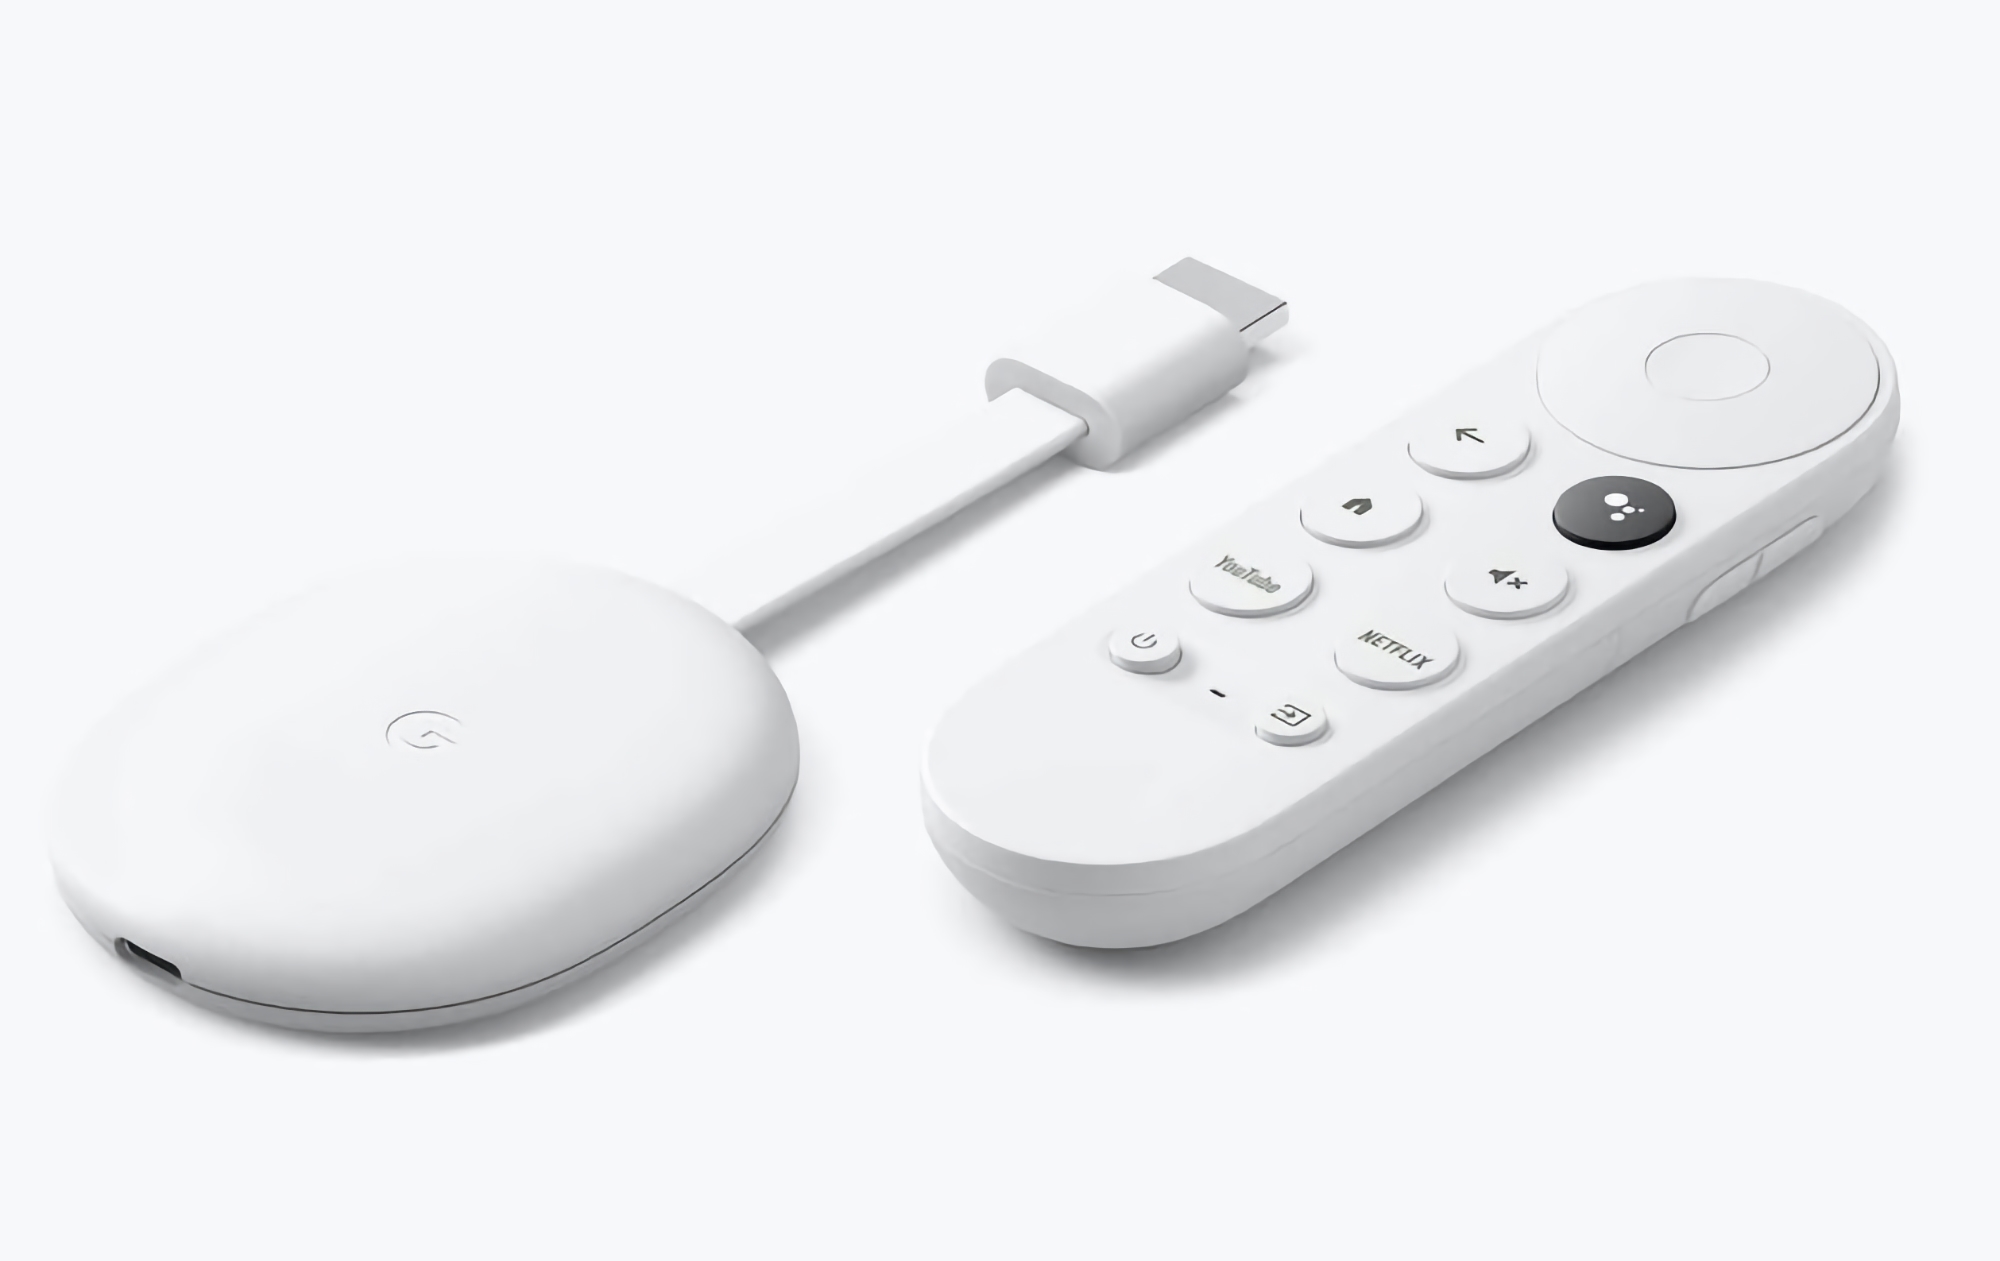 Google is preparing to release a new Chromecast with a Google TV interface on board